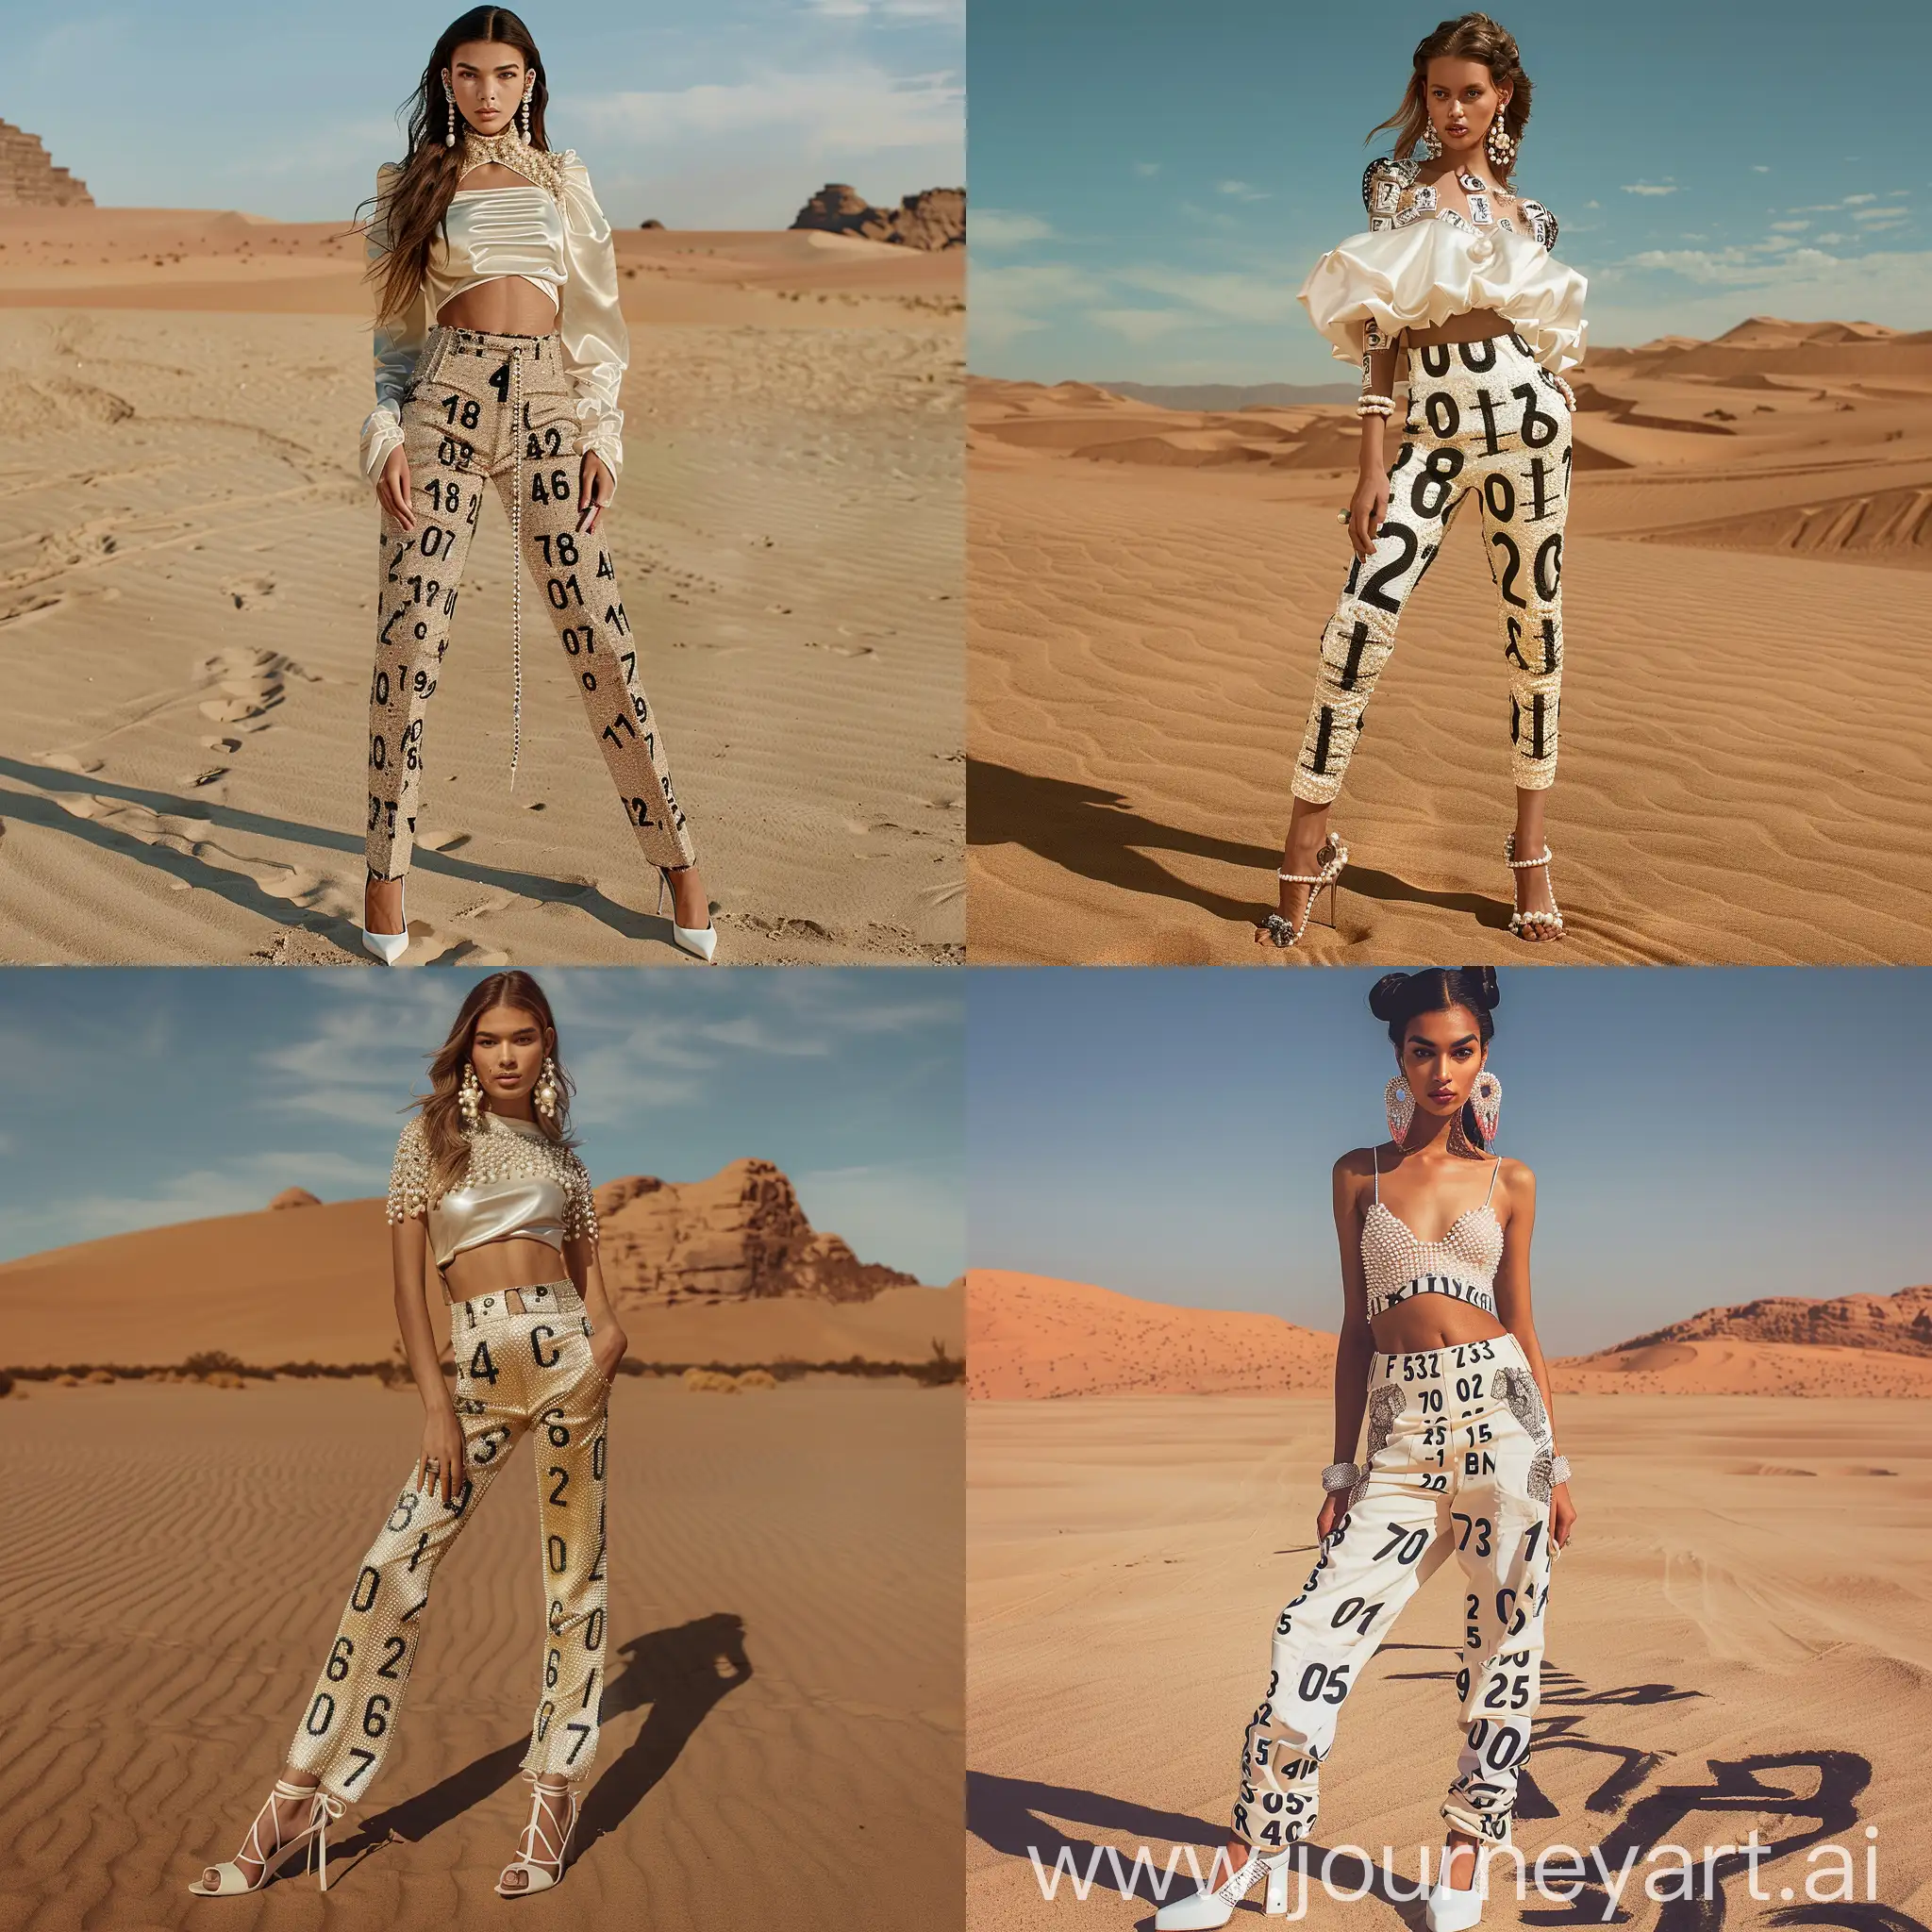 Fashion-Photoshoot-Model-Wearing-Numberthemed-Earrings-and-Clothing-in-Desert-Setting